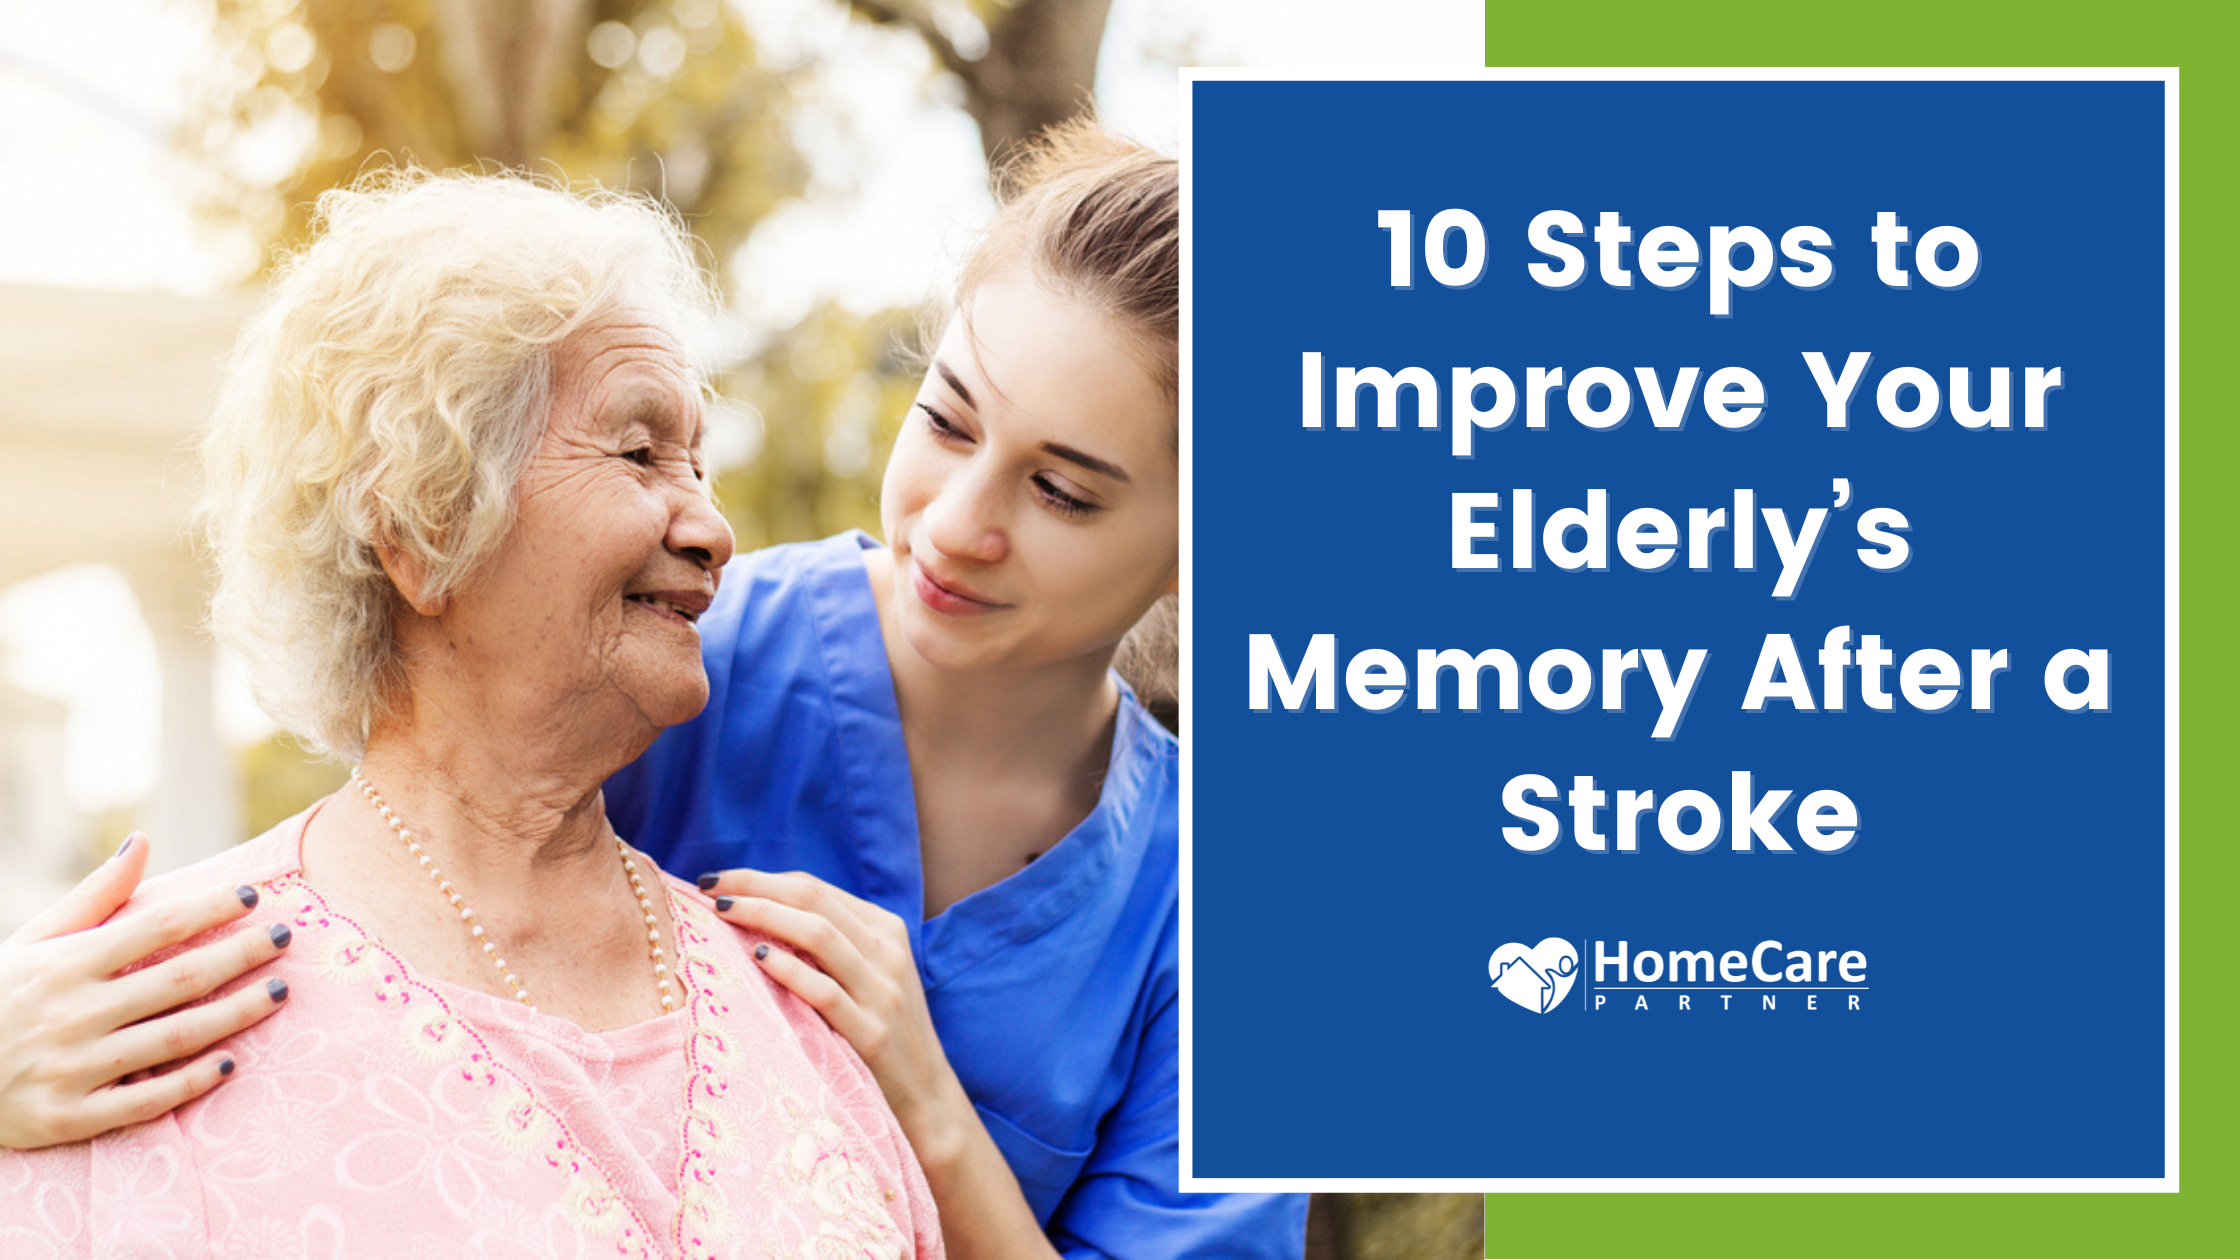 10 Steps to Improve Your Elderly’s Memory After a Stroke